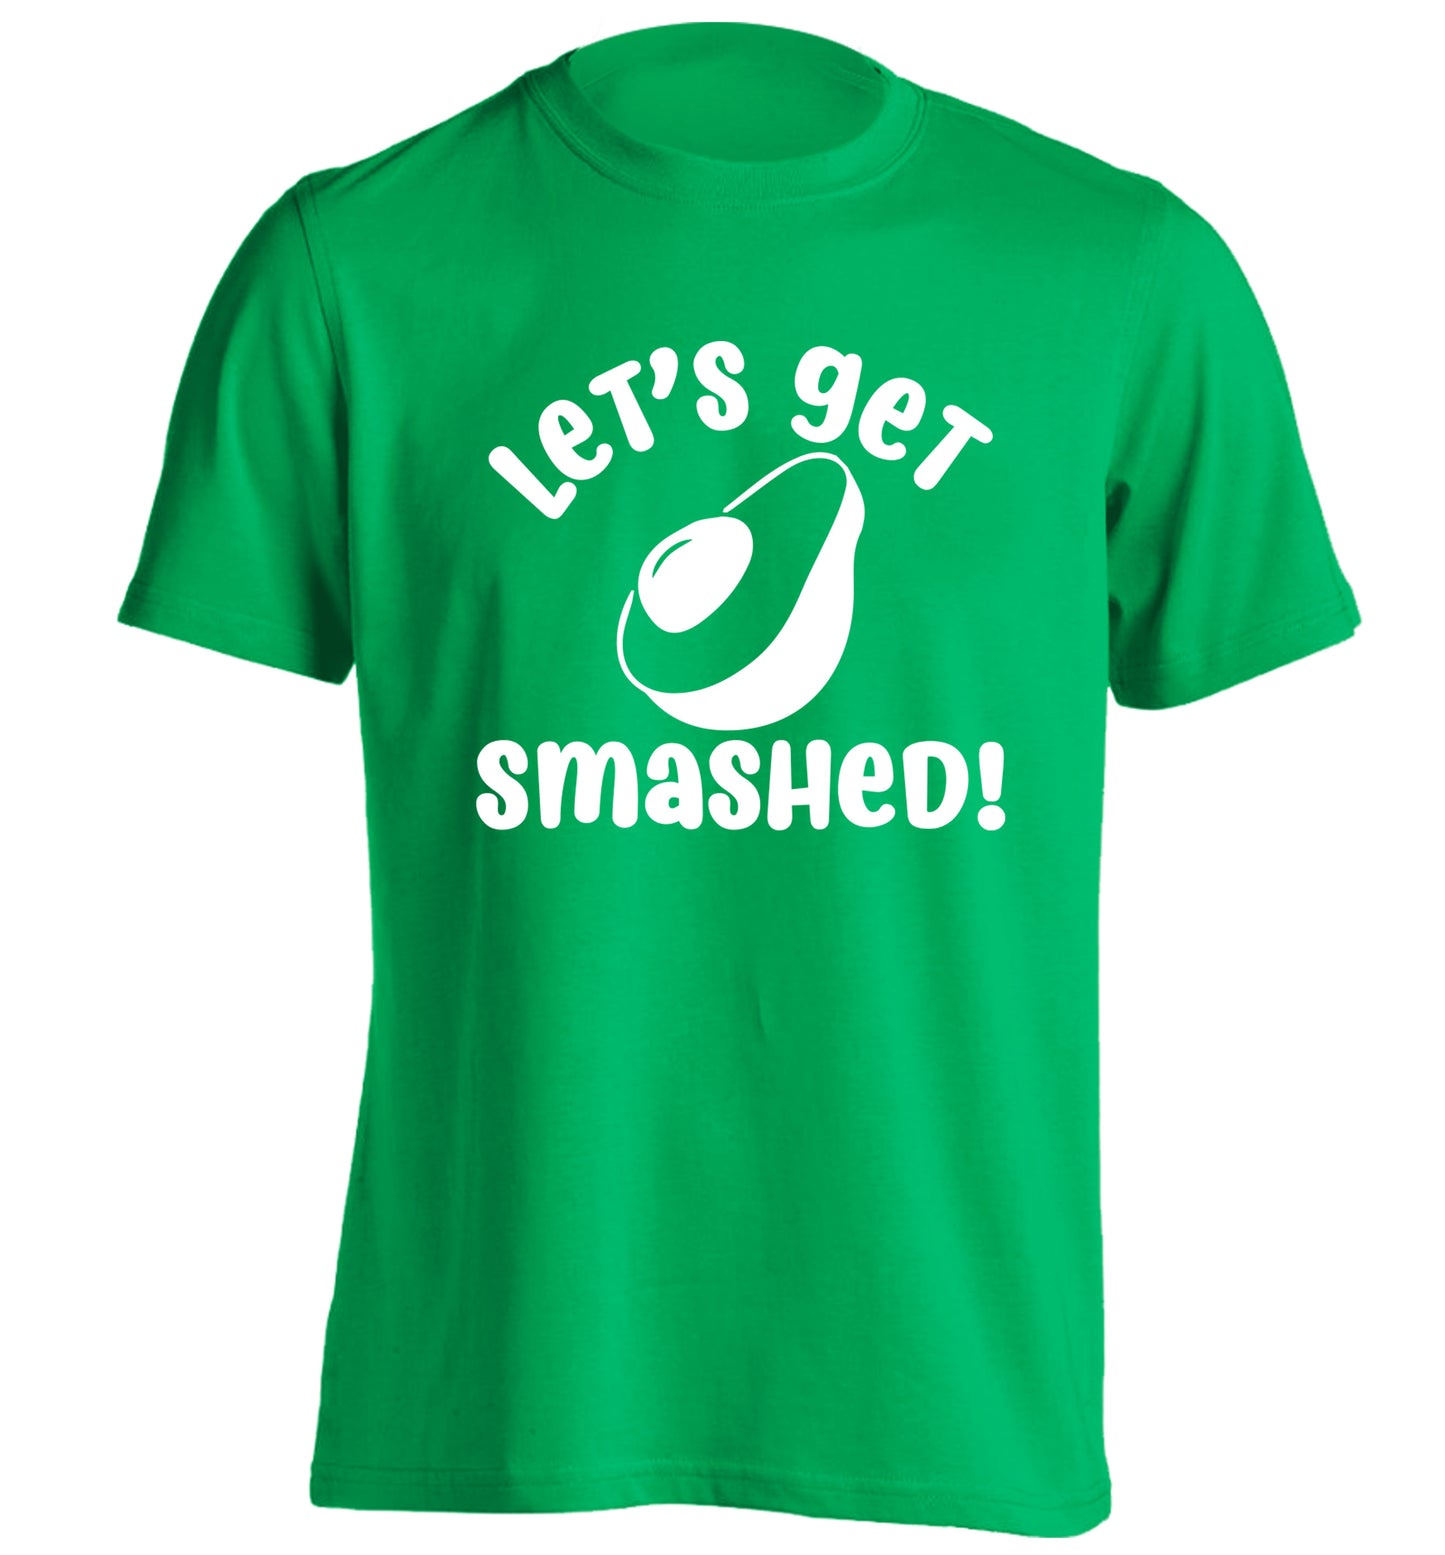 Let's get smashed adults unisex green Tshirt 2XL